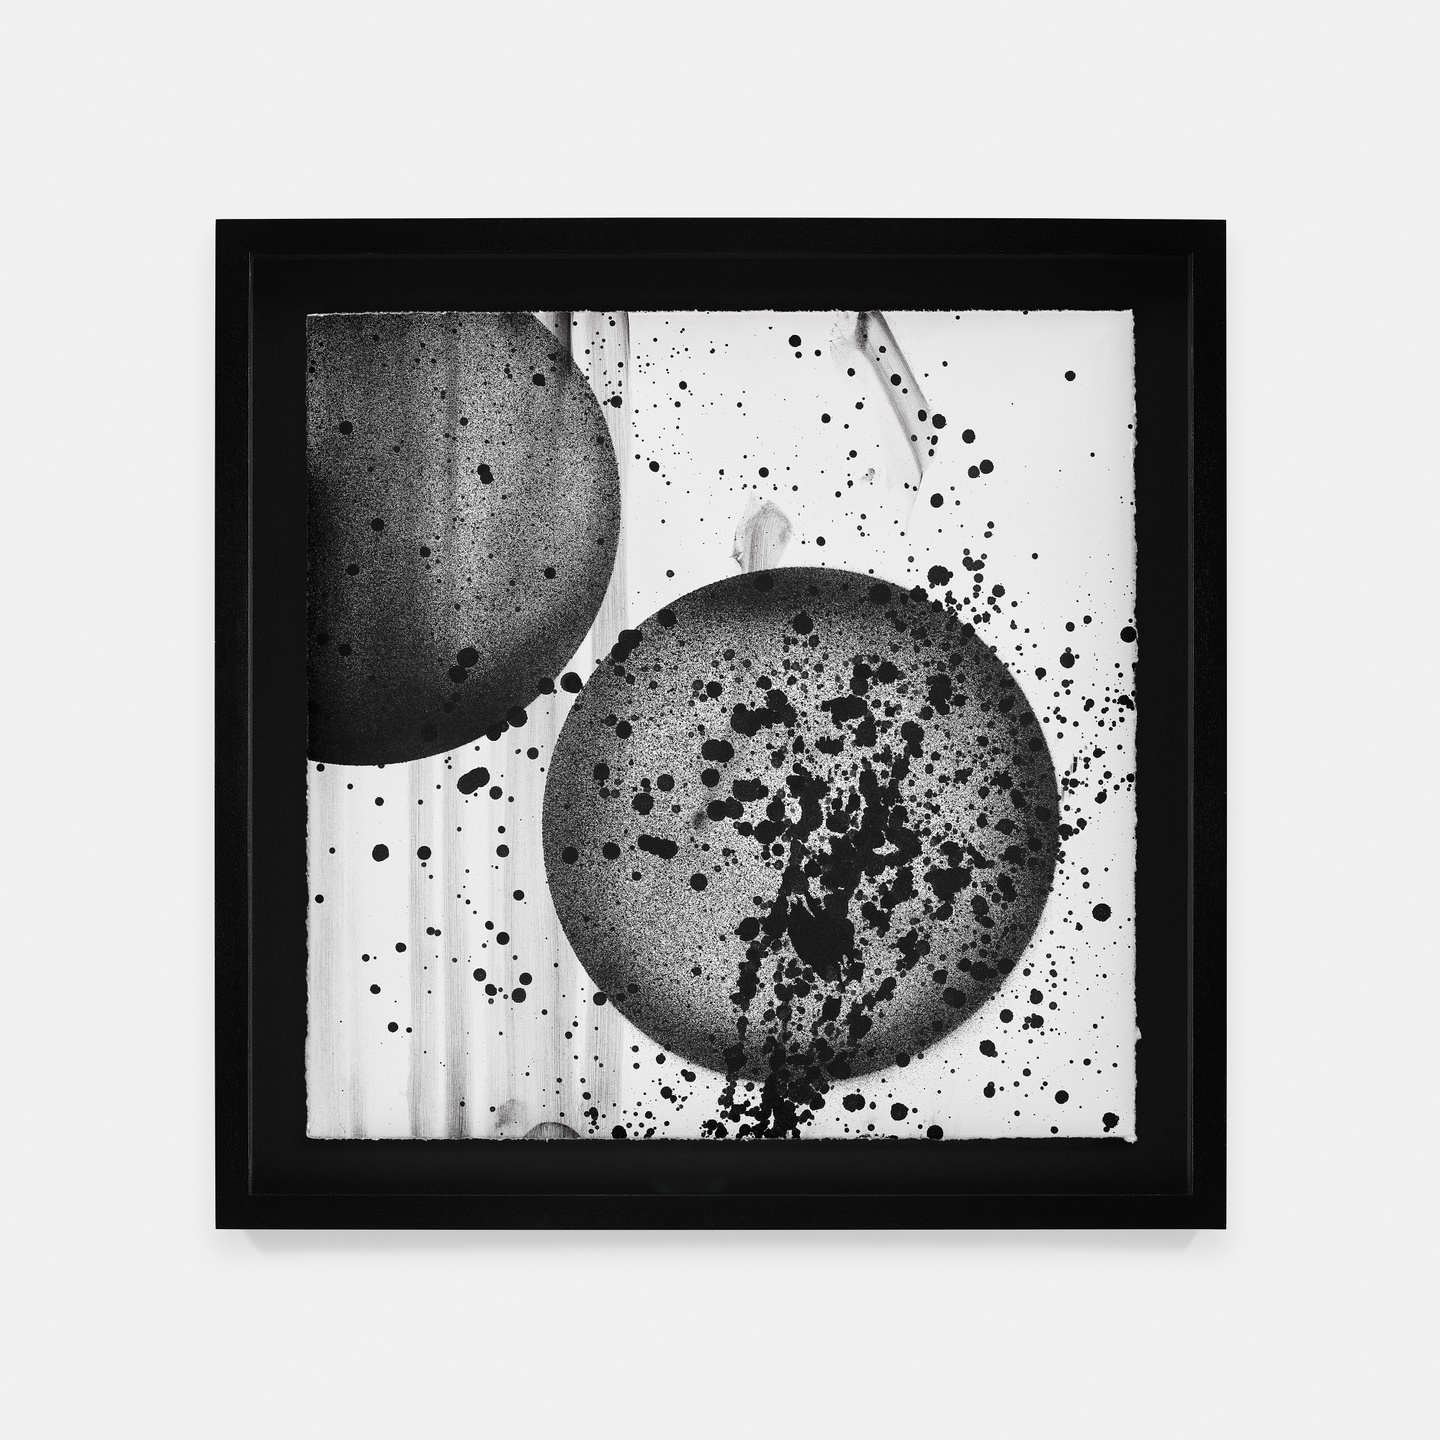 A square, black frame surrounds two gray circles with splatters of black ink on them and on the white ground